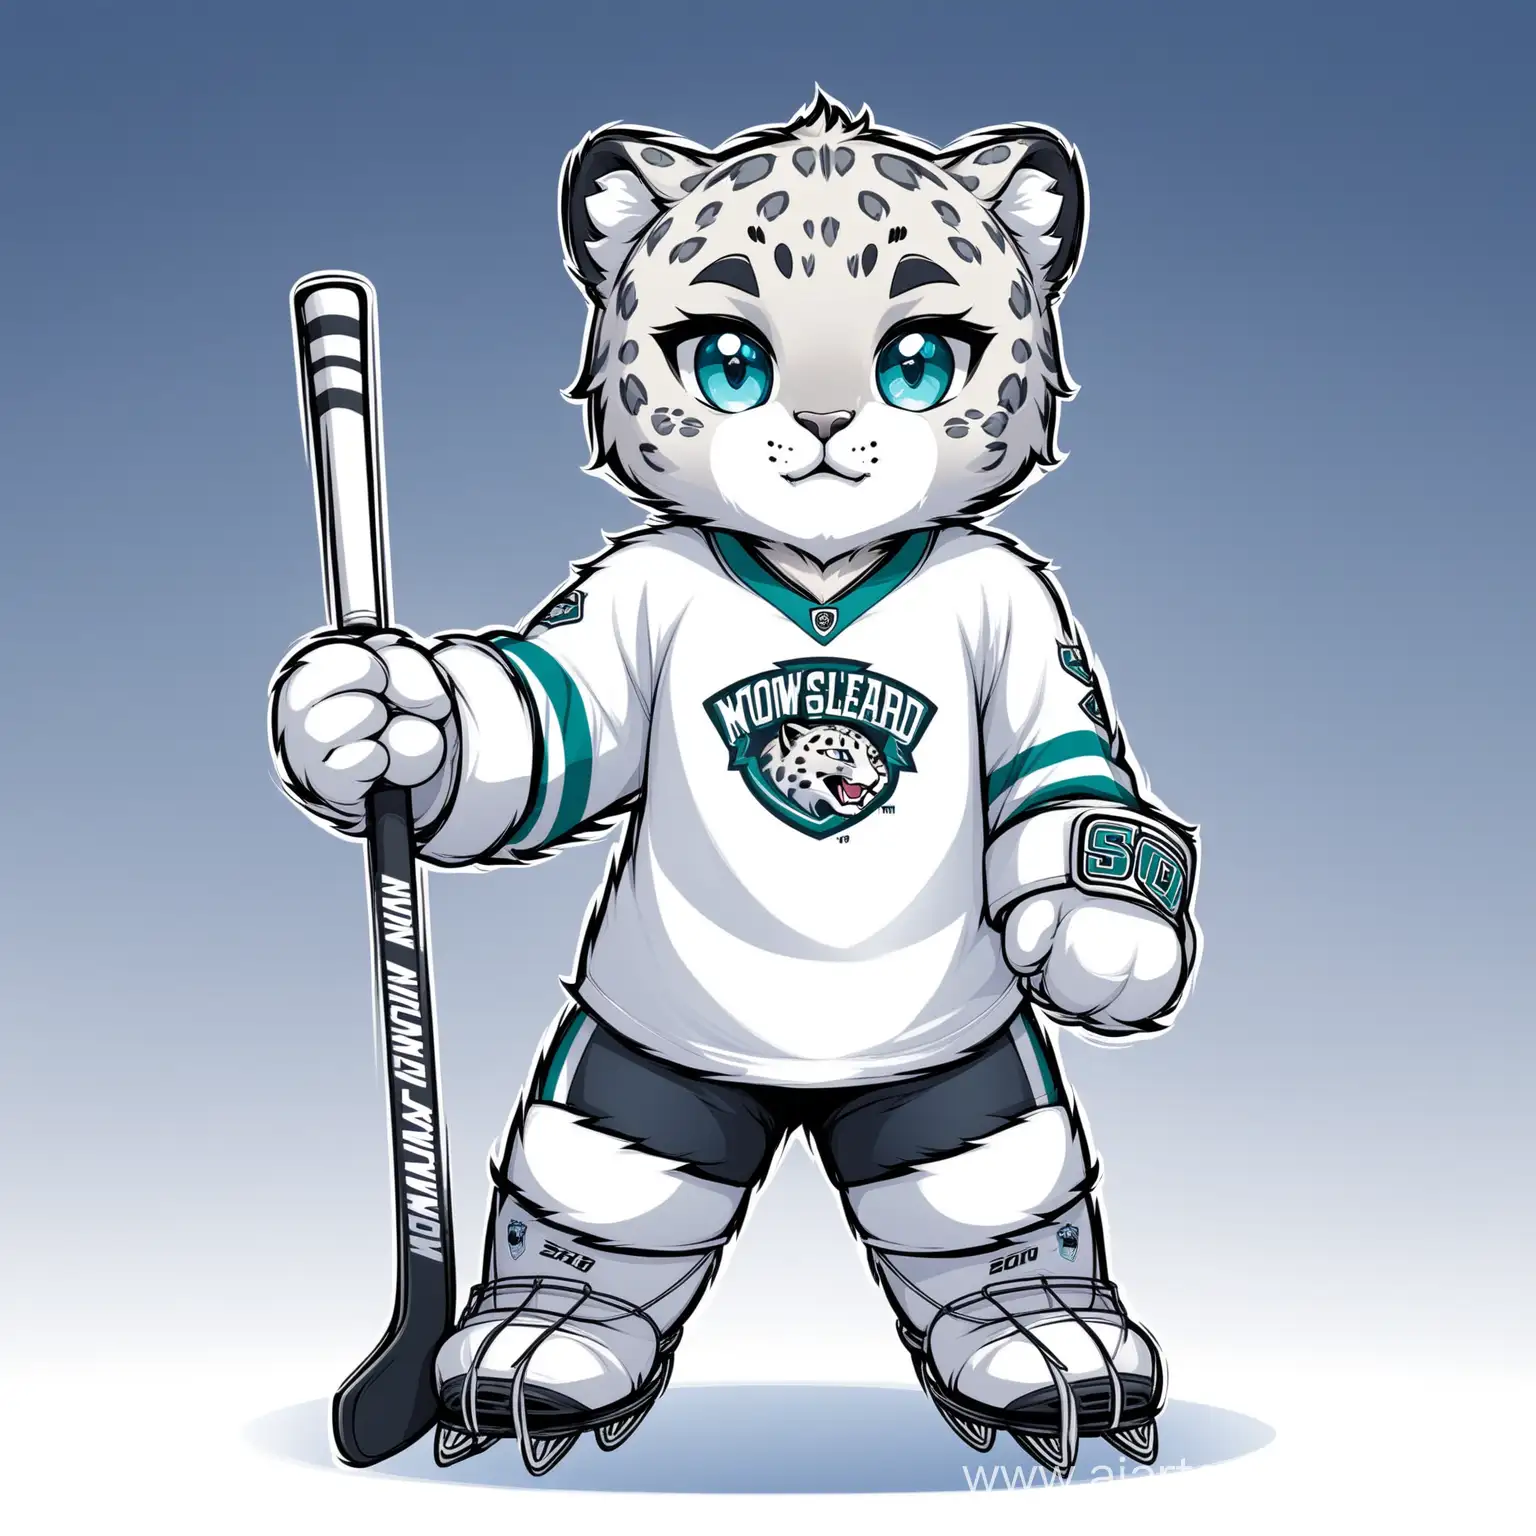 Young-Snow-Leopard-Hockey-Mascot-Playing-on-Ice